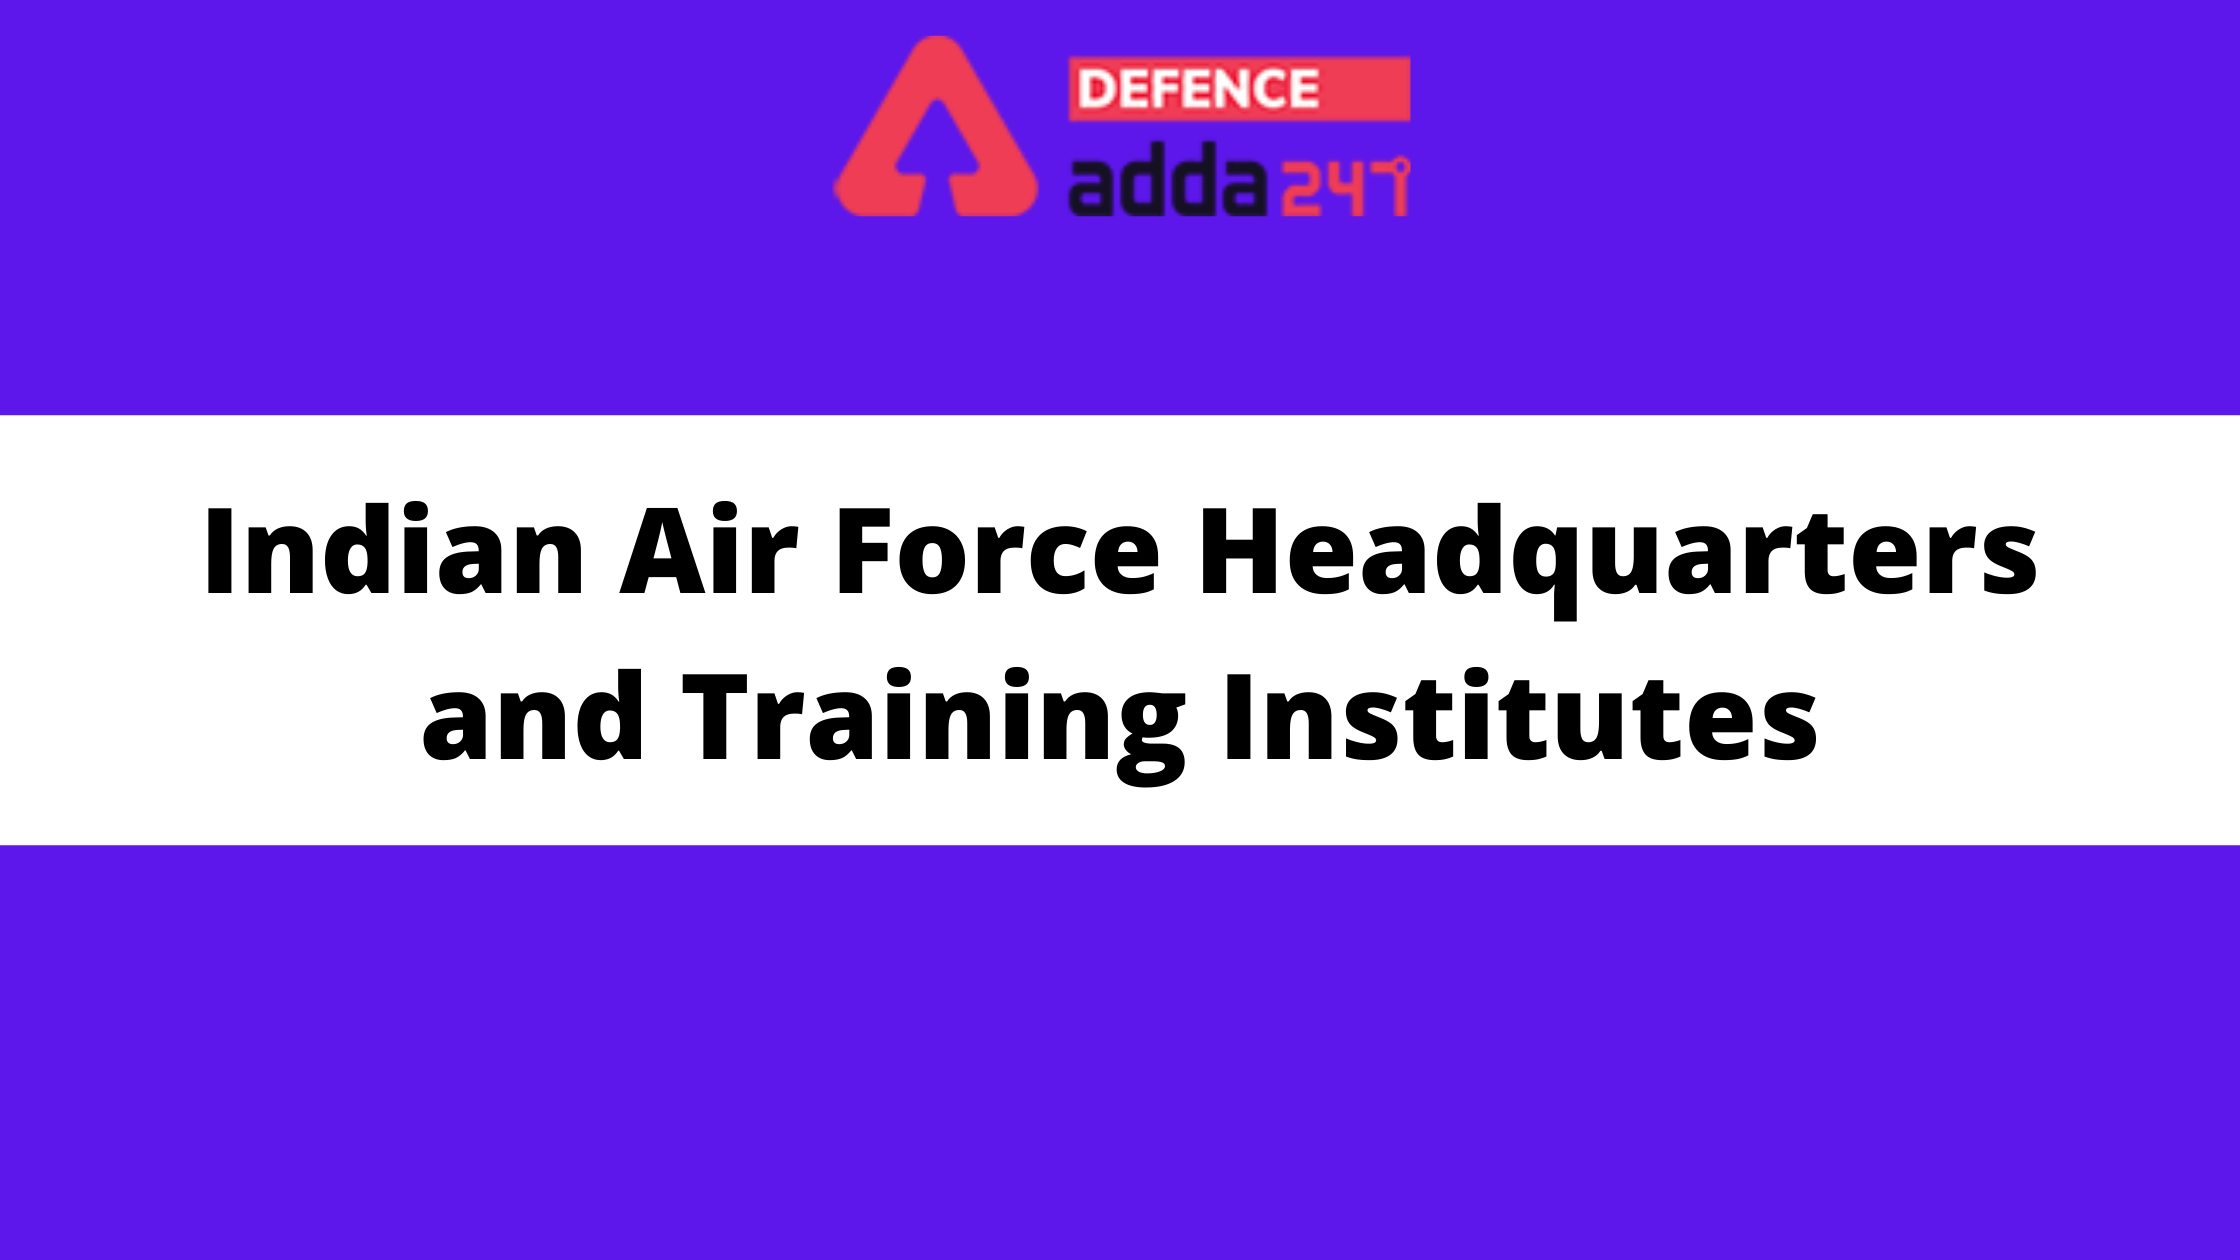 Indian Air Force Headquarters and Training Institutes (1)